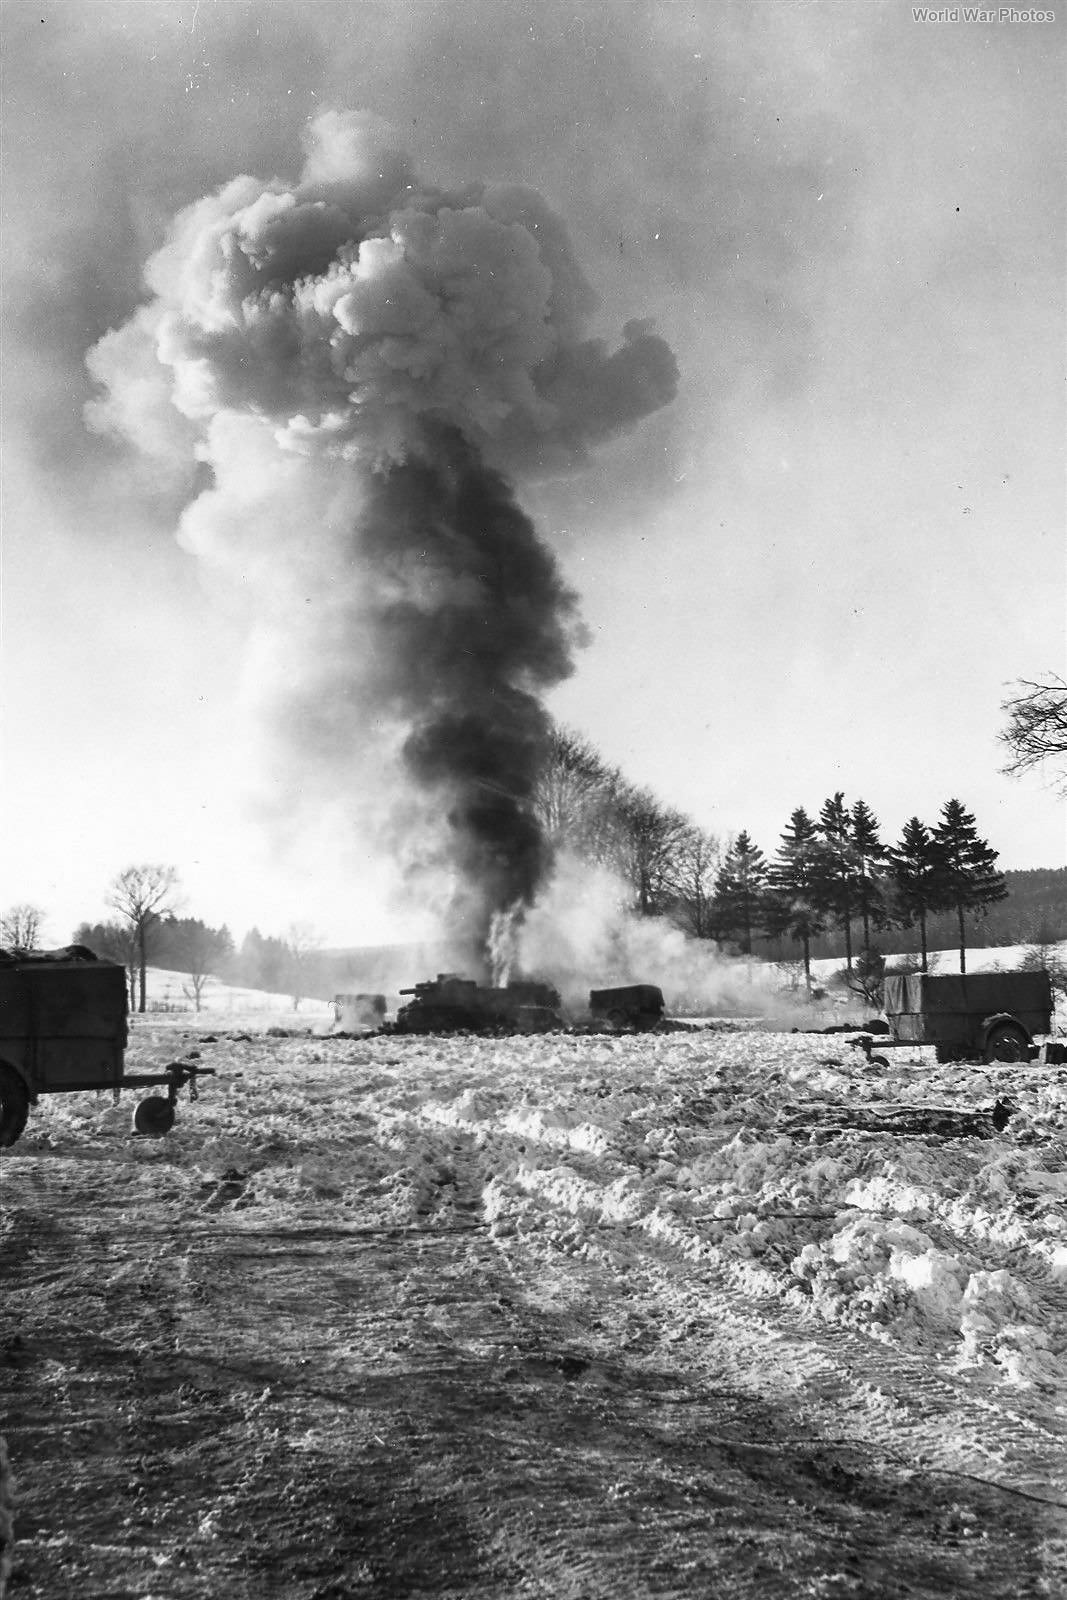 M7 from 3rd Armored Division takes counter-battery hit Bulge 16 January 1945